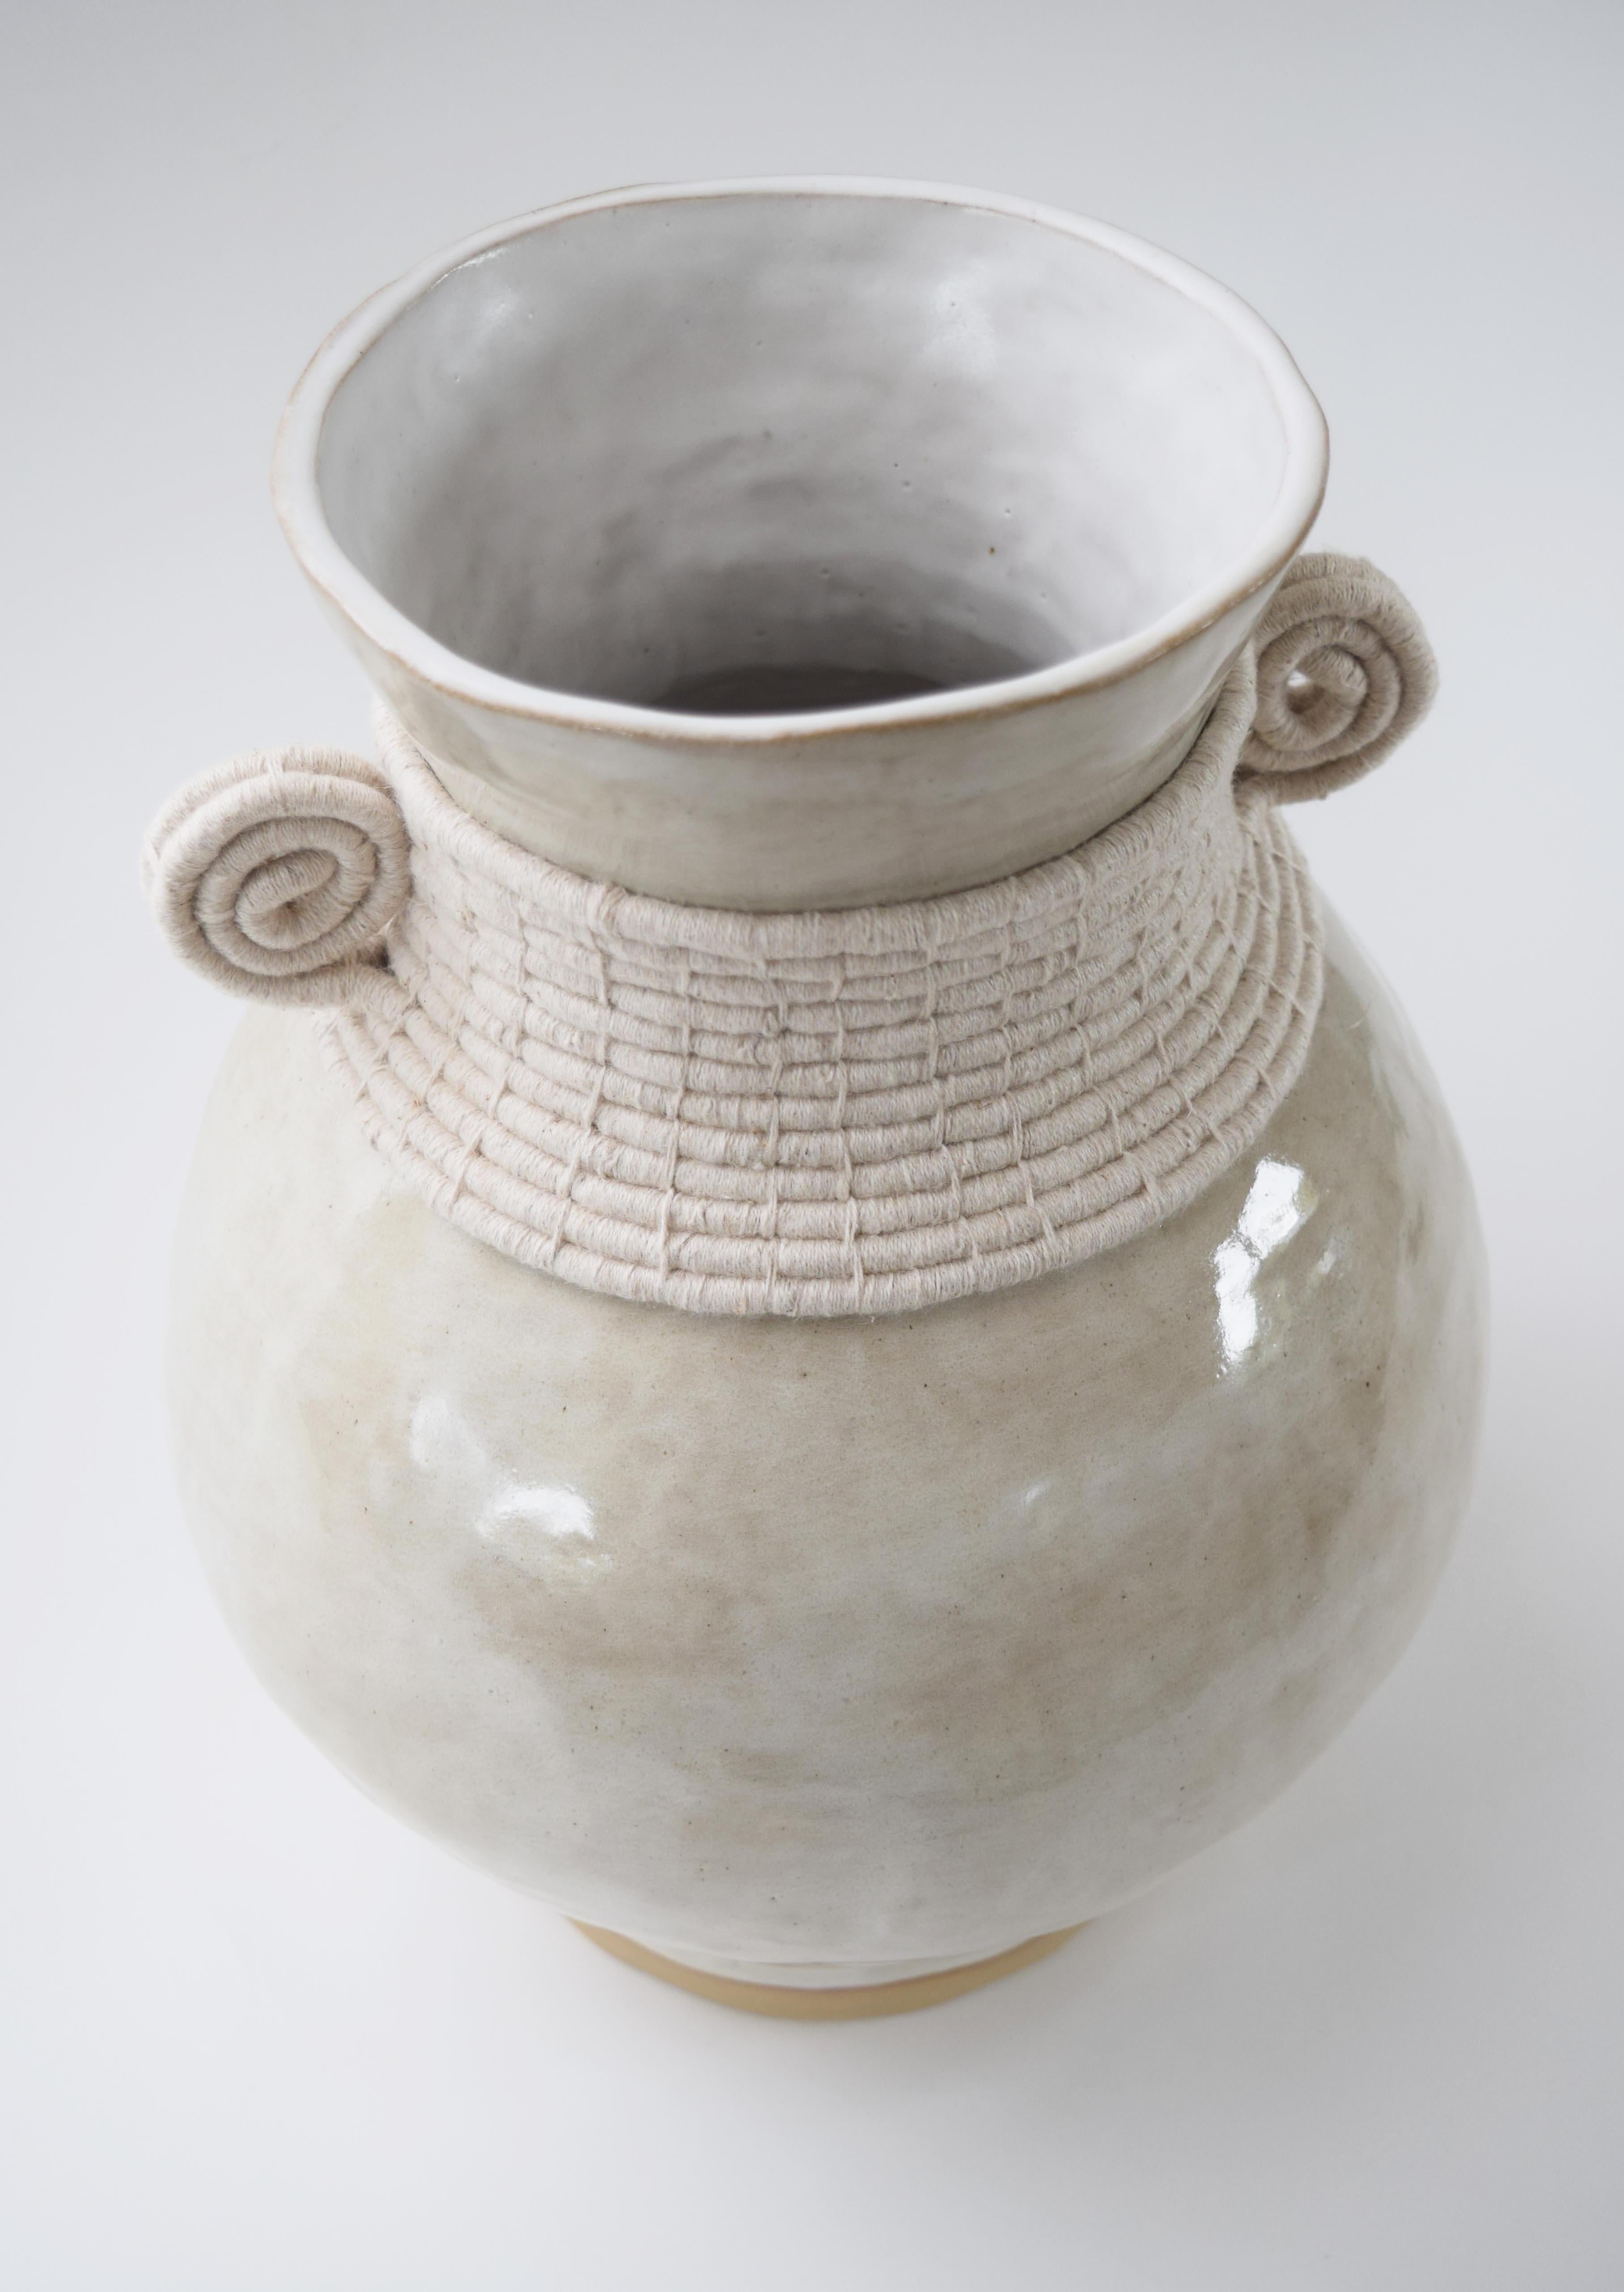 Organic Modern One of a Kind Handmade Ceramic Vase #796 - Off White Glaze & Woven Cotton Detail For Sale